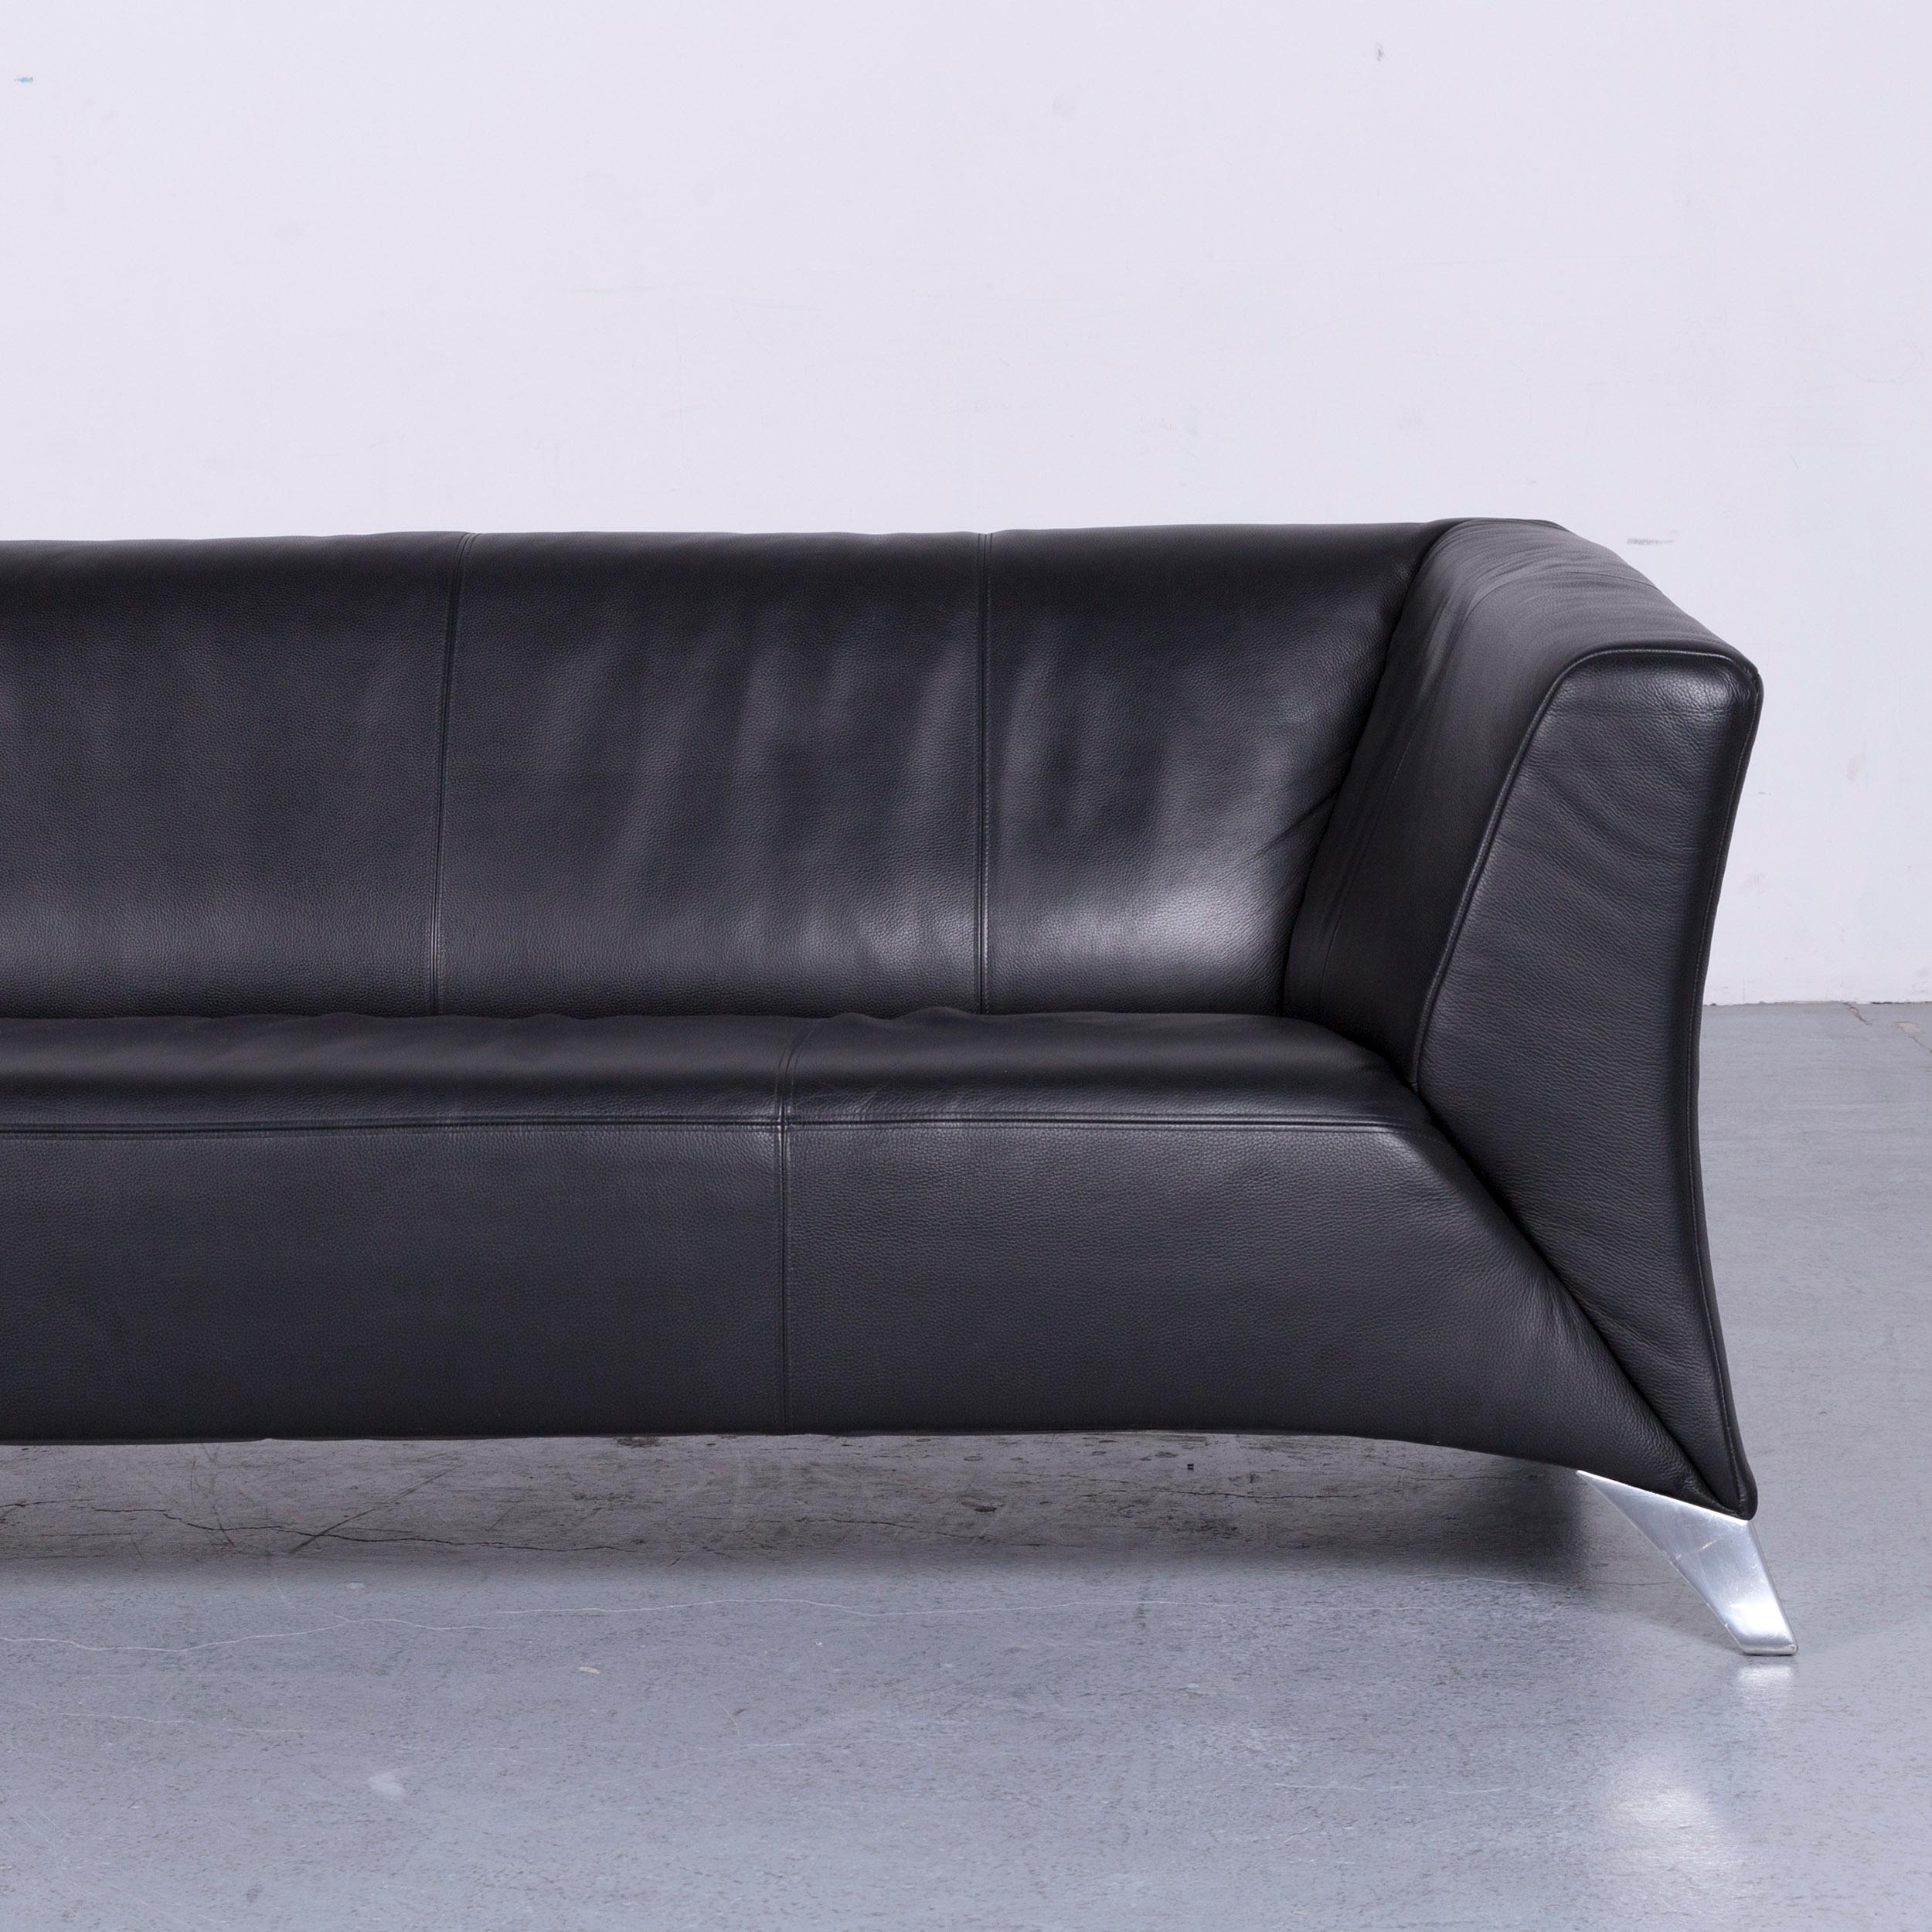 Rolf Benz 322 Designer Sofa Black Two-Seat Leather Modern Couch In Good Condition For Sale In Cologne, DE